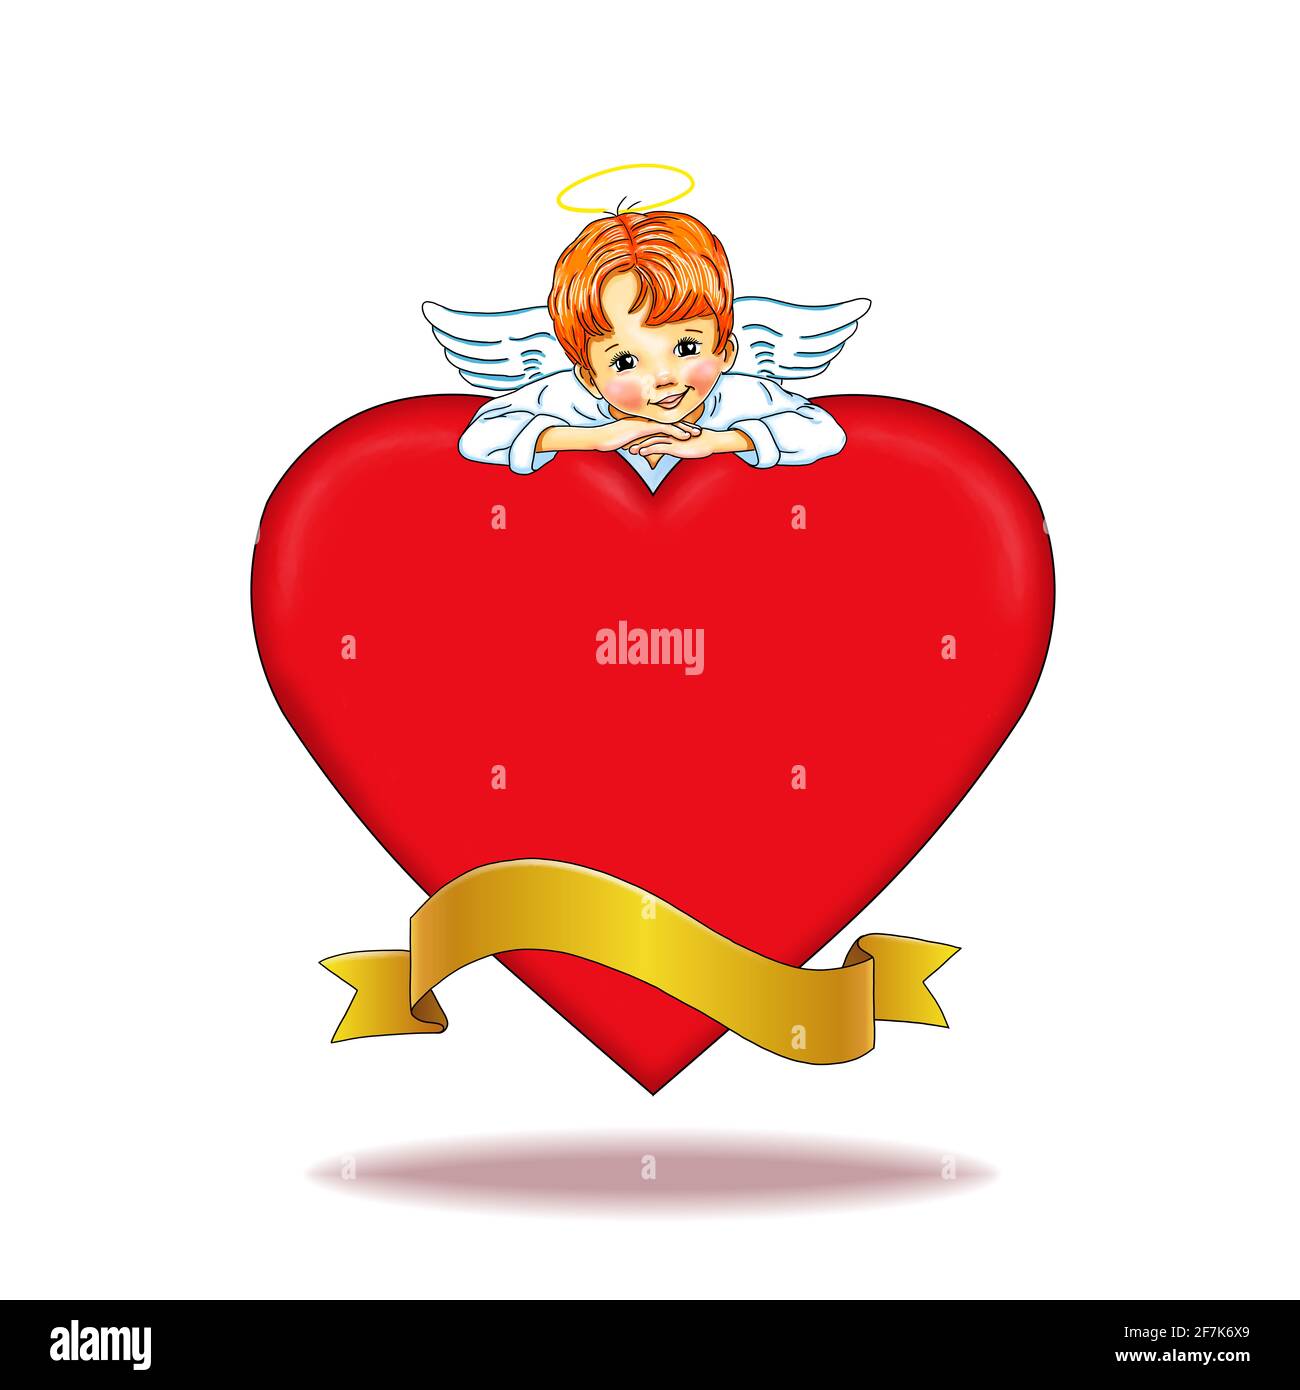 Template little angel cute sweet pretty heart red banner ribbon gold anniversary holiday wedding layout design joy happy greeting card saying valentin Stock Photo